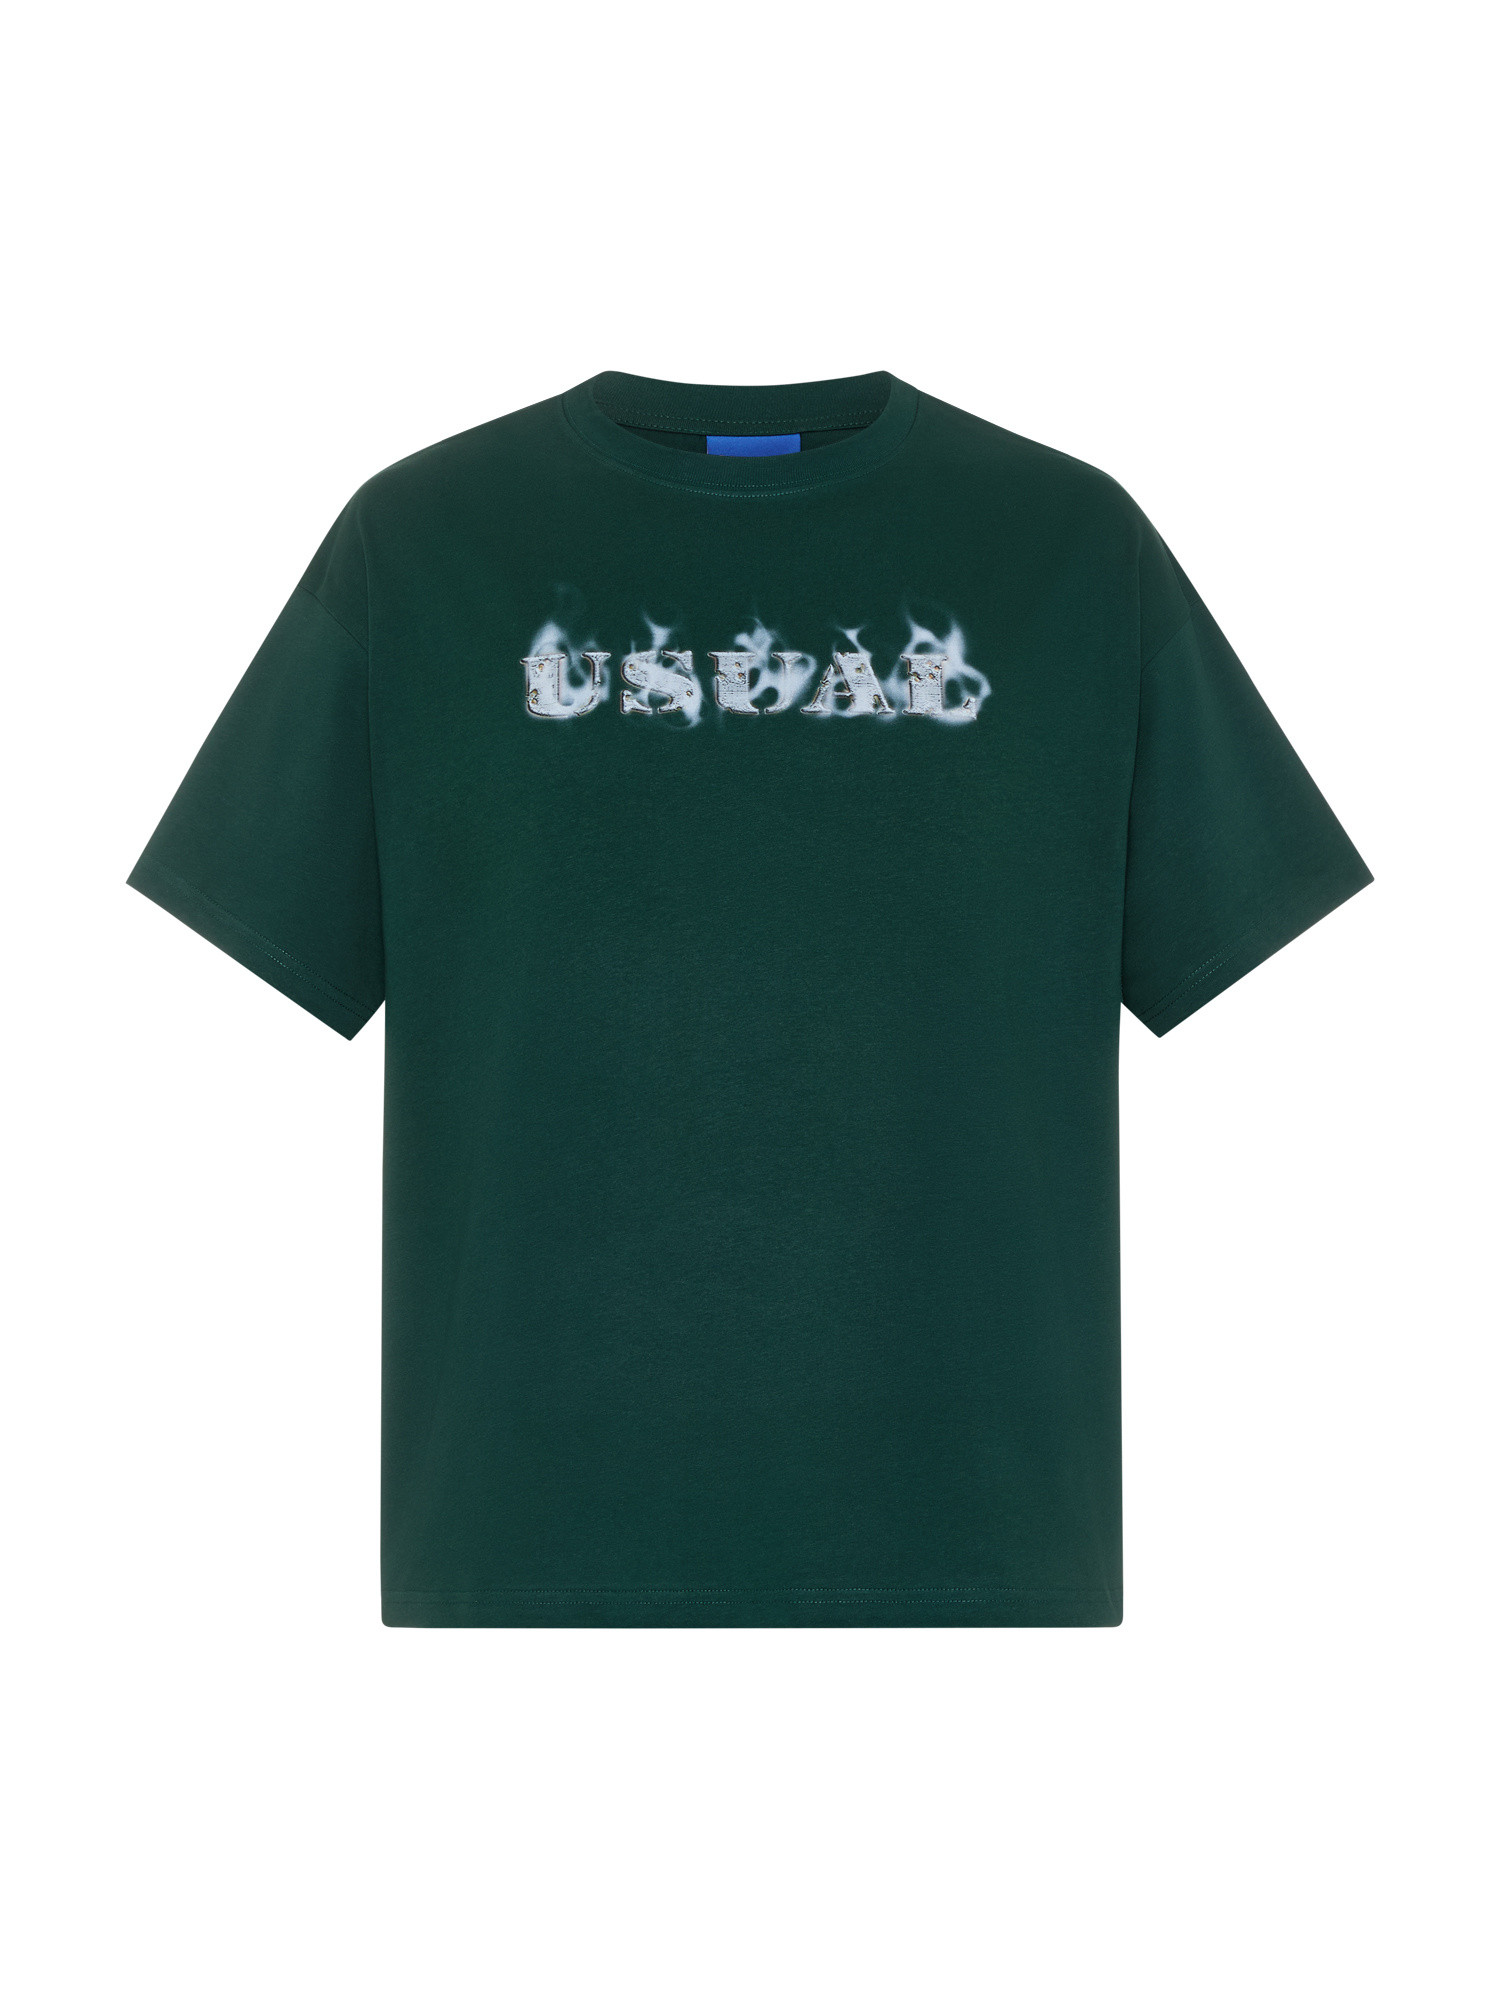 Usual - Bullet T-Shirt, Green, large image number 0